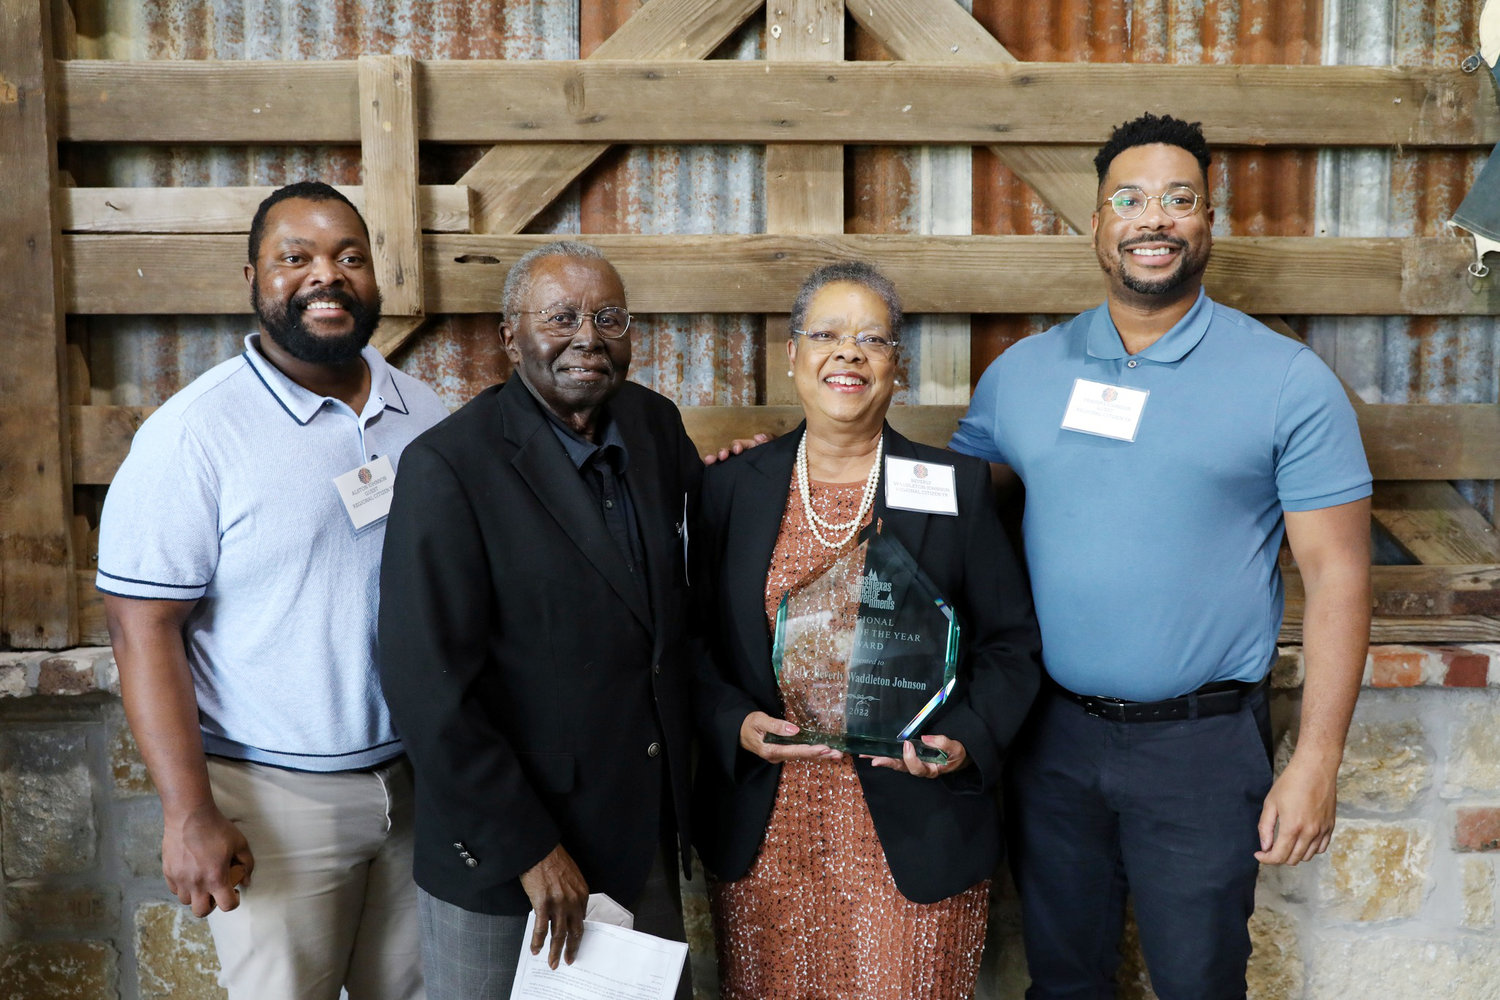 Dr. Beverly Waddleton Johnson of Quitman was presented the regional citizen of the year award last week by the East Texas Council of Governments. Attending the event were her husband, Dr. John Johnson, and sons Alston, left, and Travers.